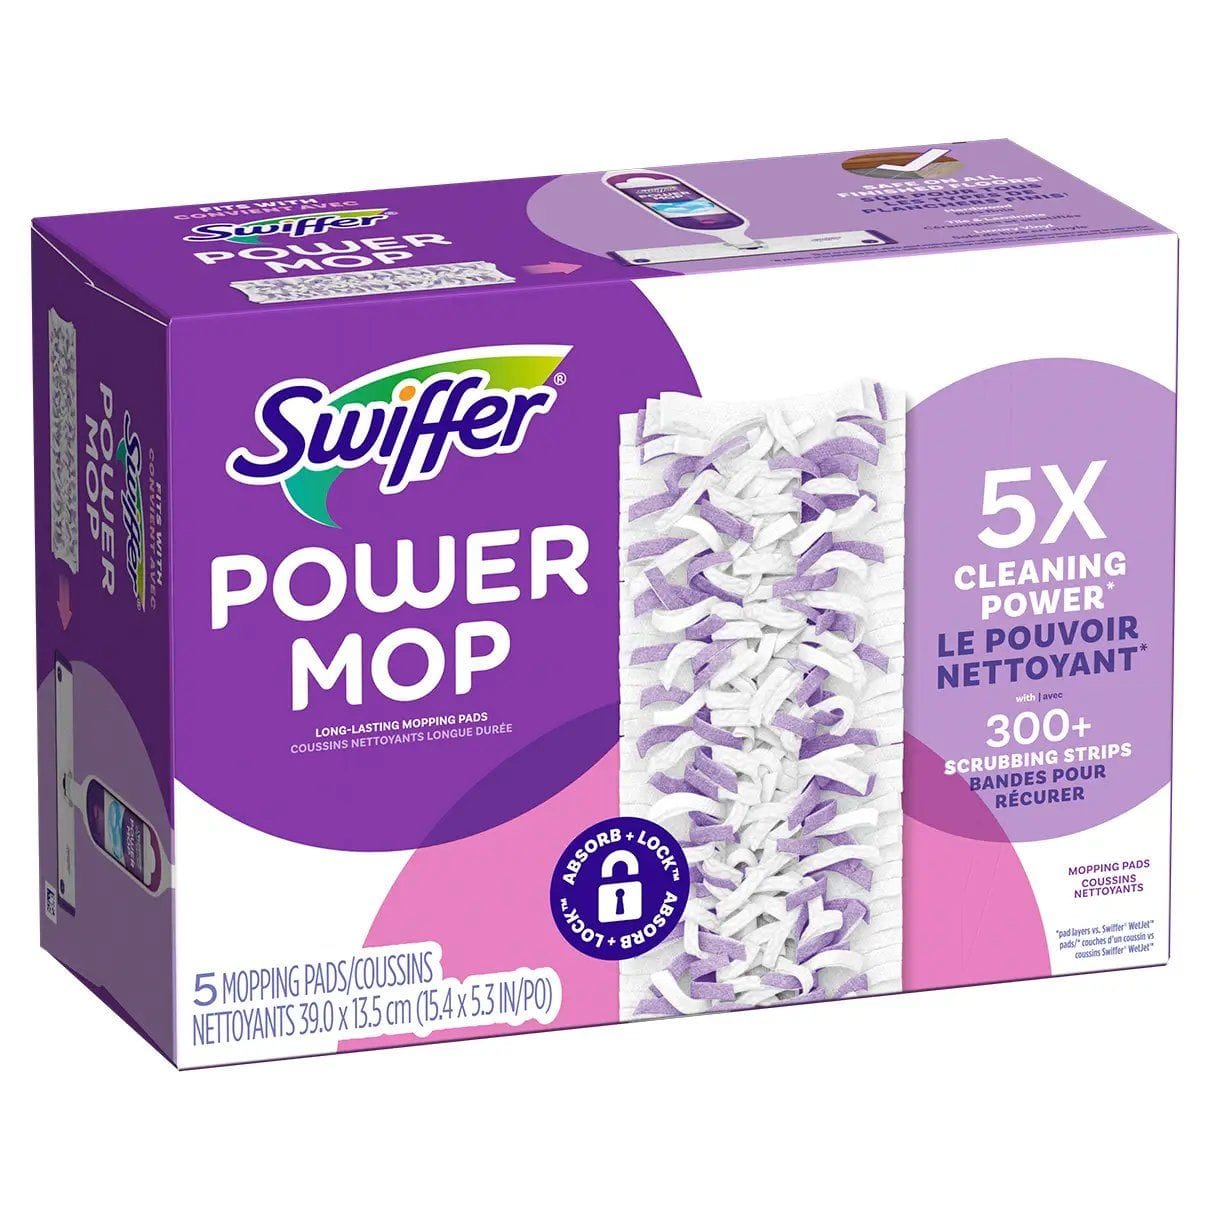 Swiffer Sweeper Dry Mop Refills for Floor Mopping and Cleaning, All Purpose  Floor Cleaning Product, Unscented, 52 Count (Packaging May Vary)